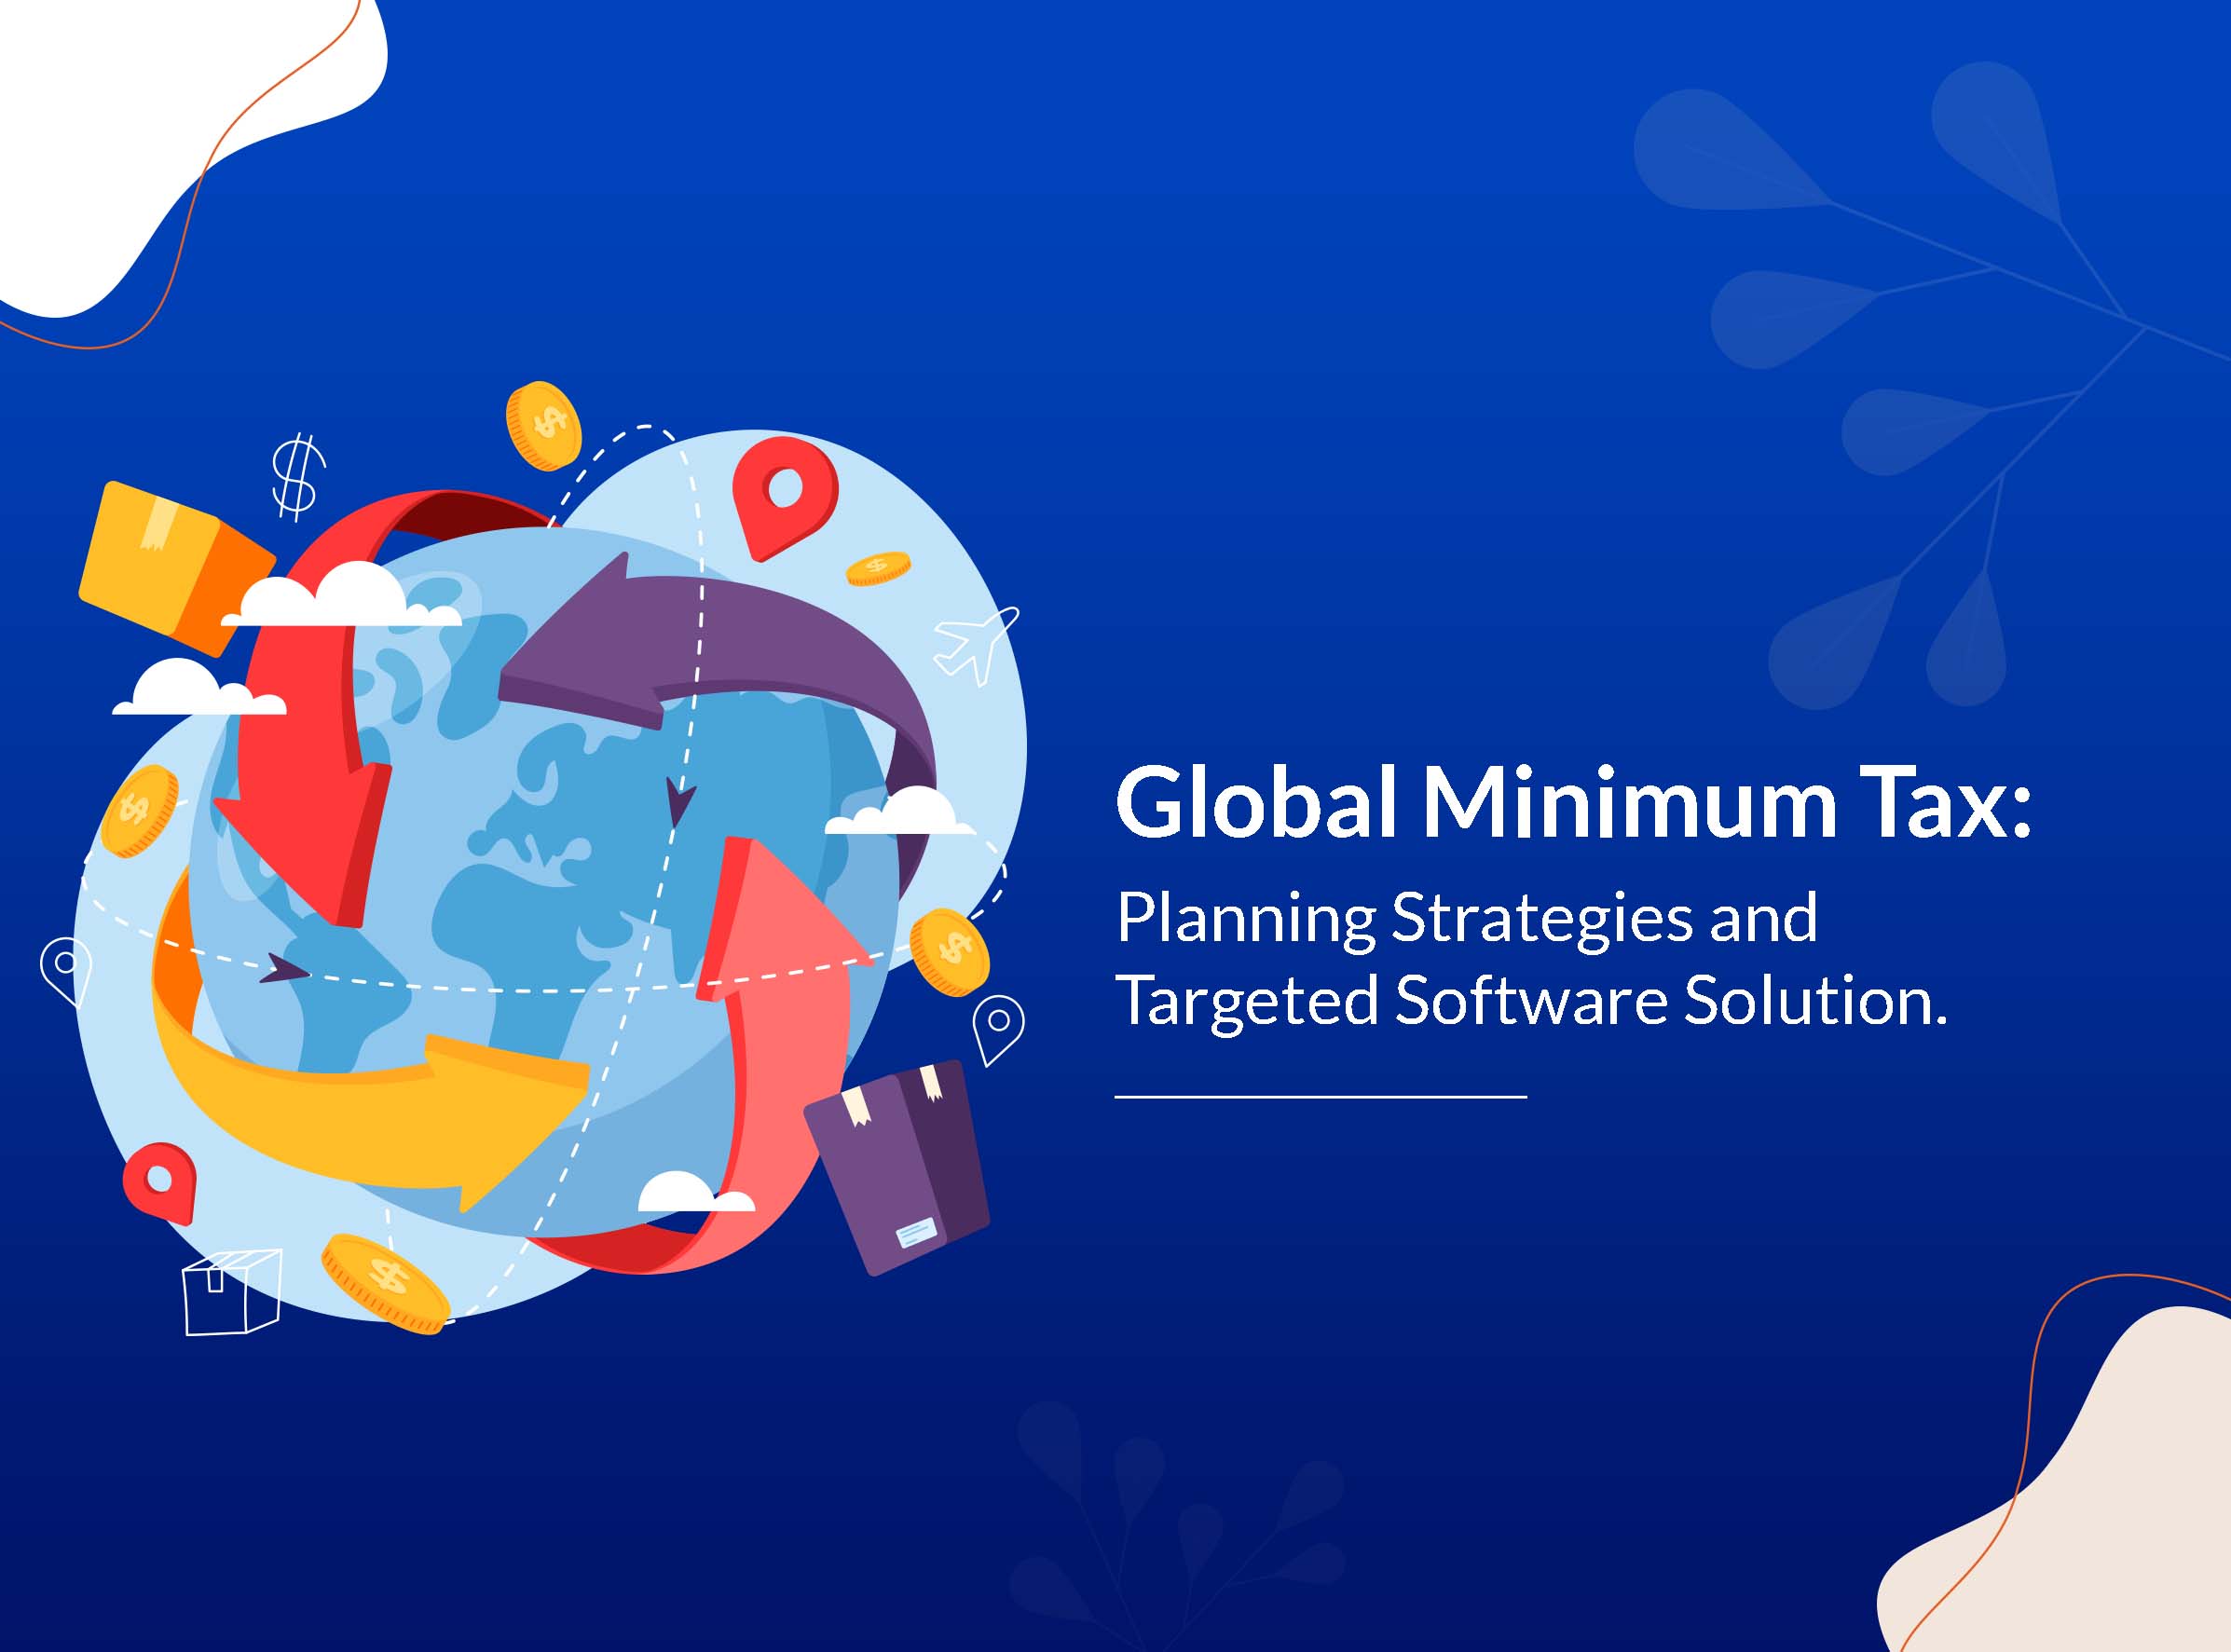 Global Minimum Tax: Planning Strategies and Targeted Software Solution